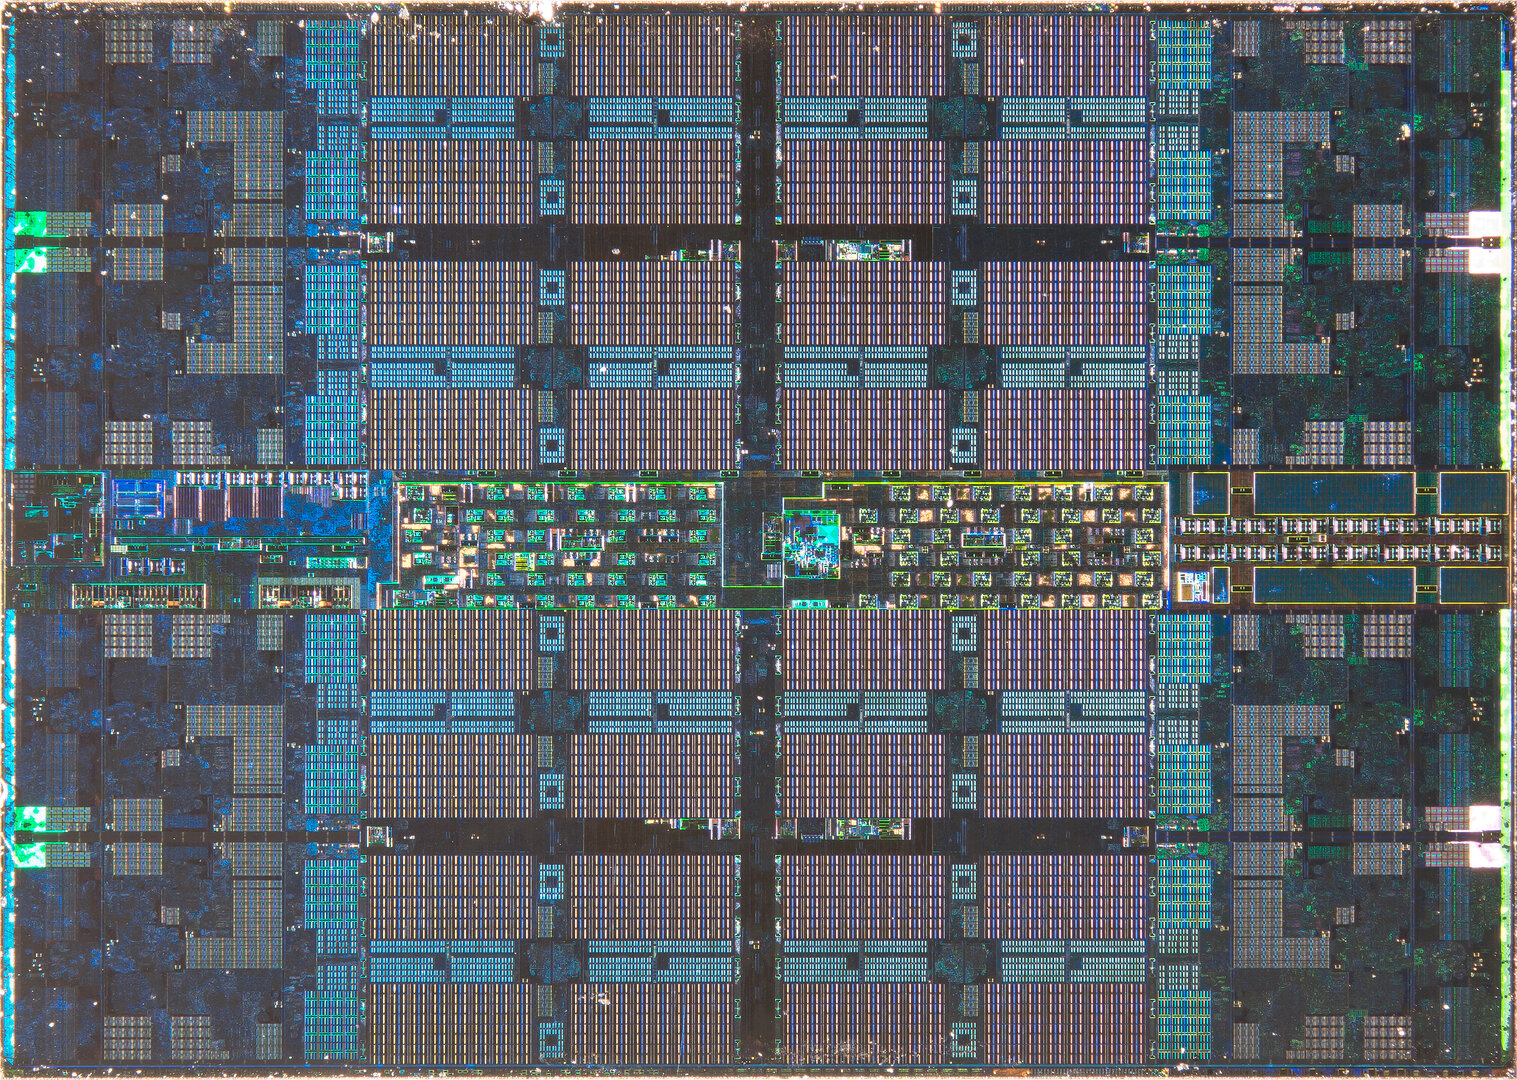 Zen 2 CCD: Eight cores on the edge and 32 MB L3 cache in the middle